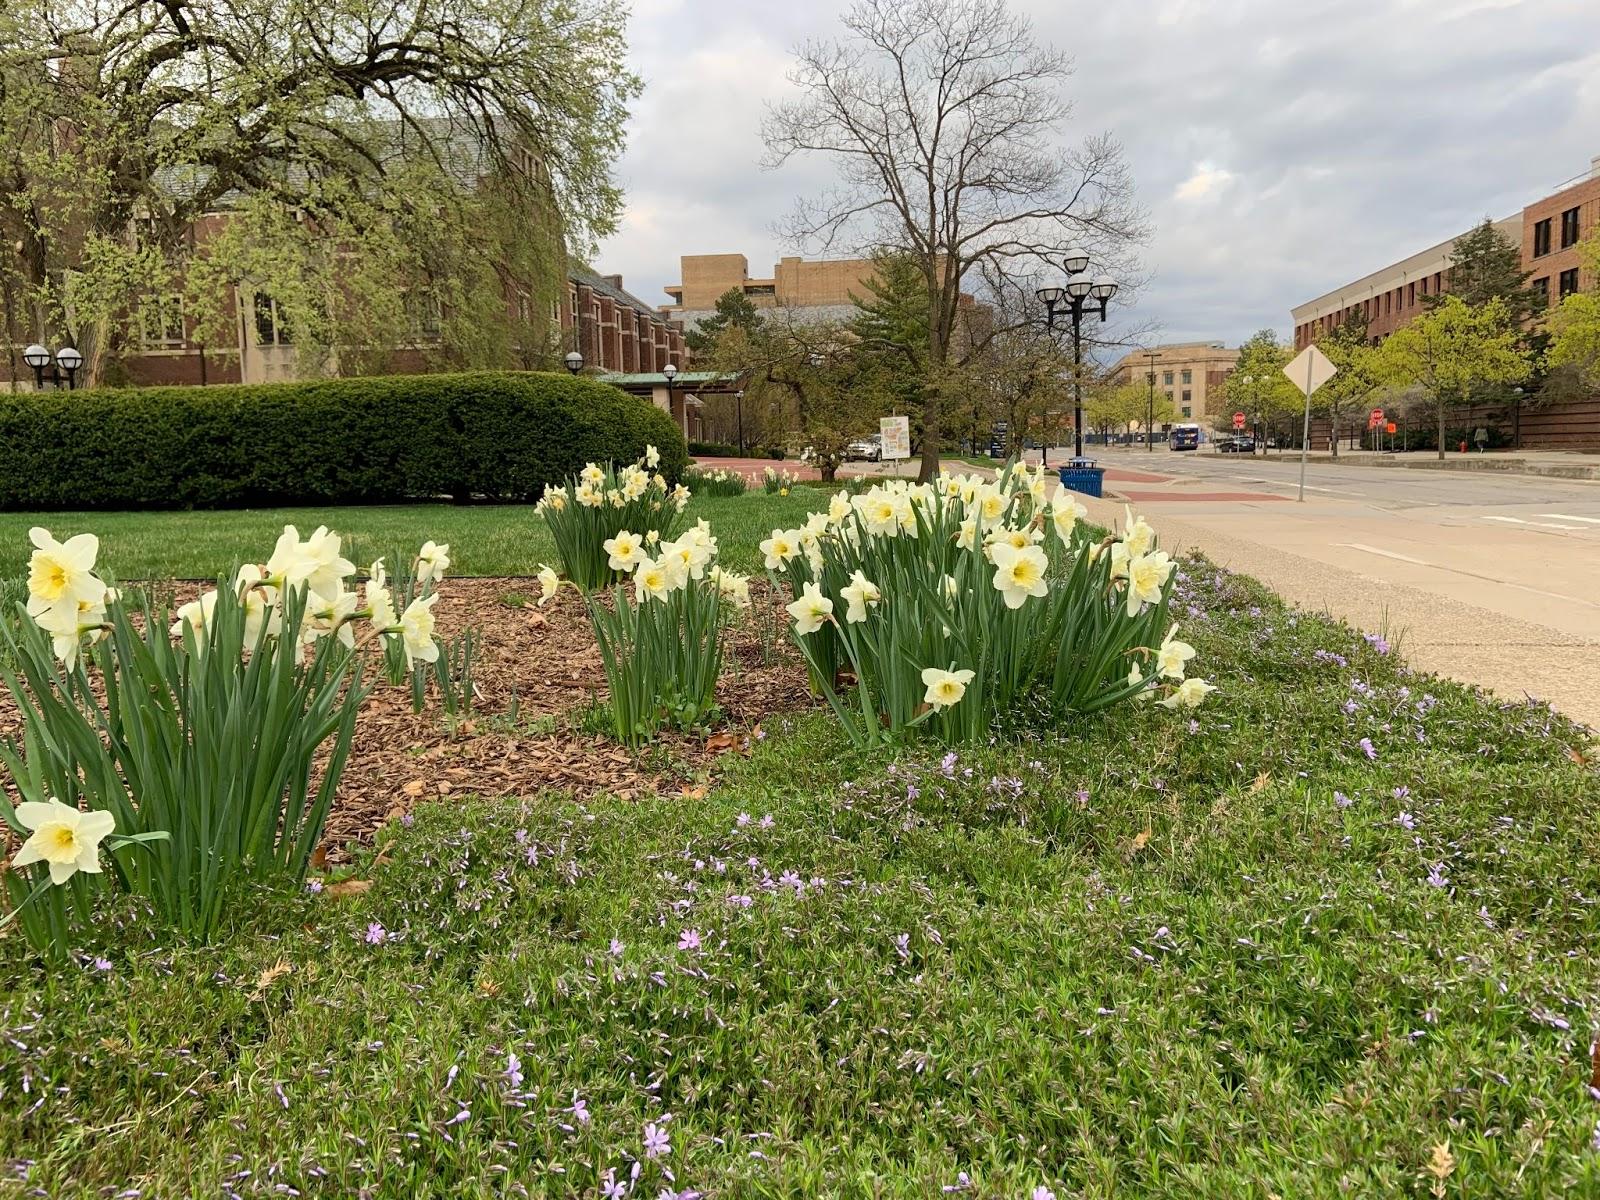 daffodils in bloom on campus